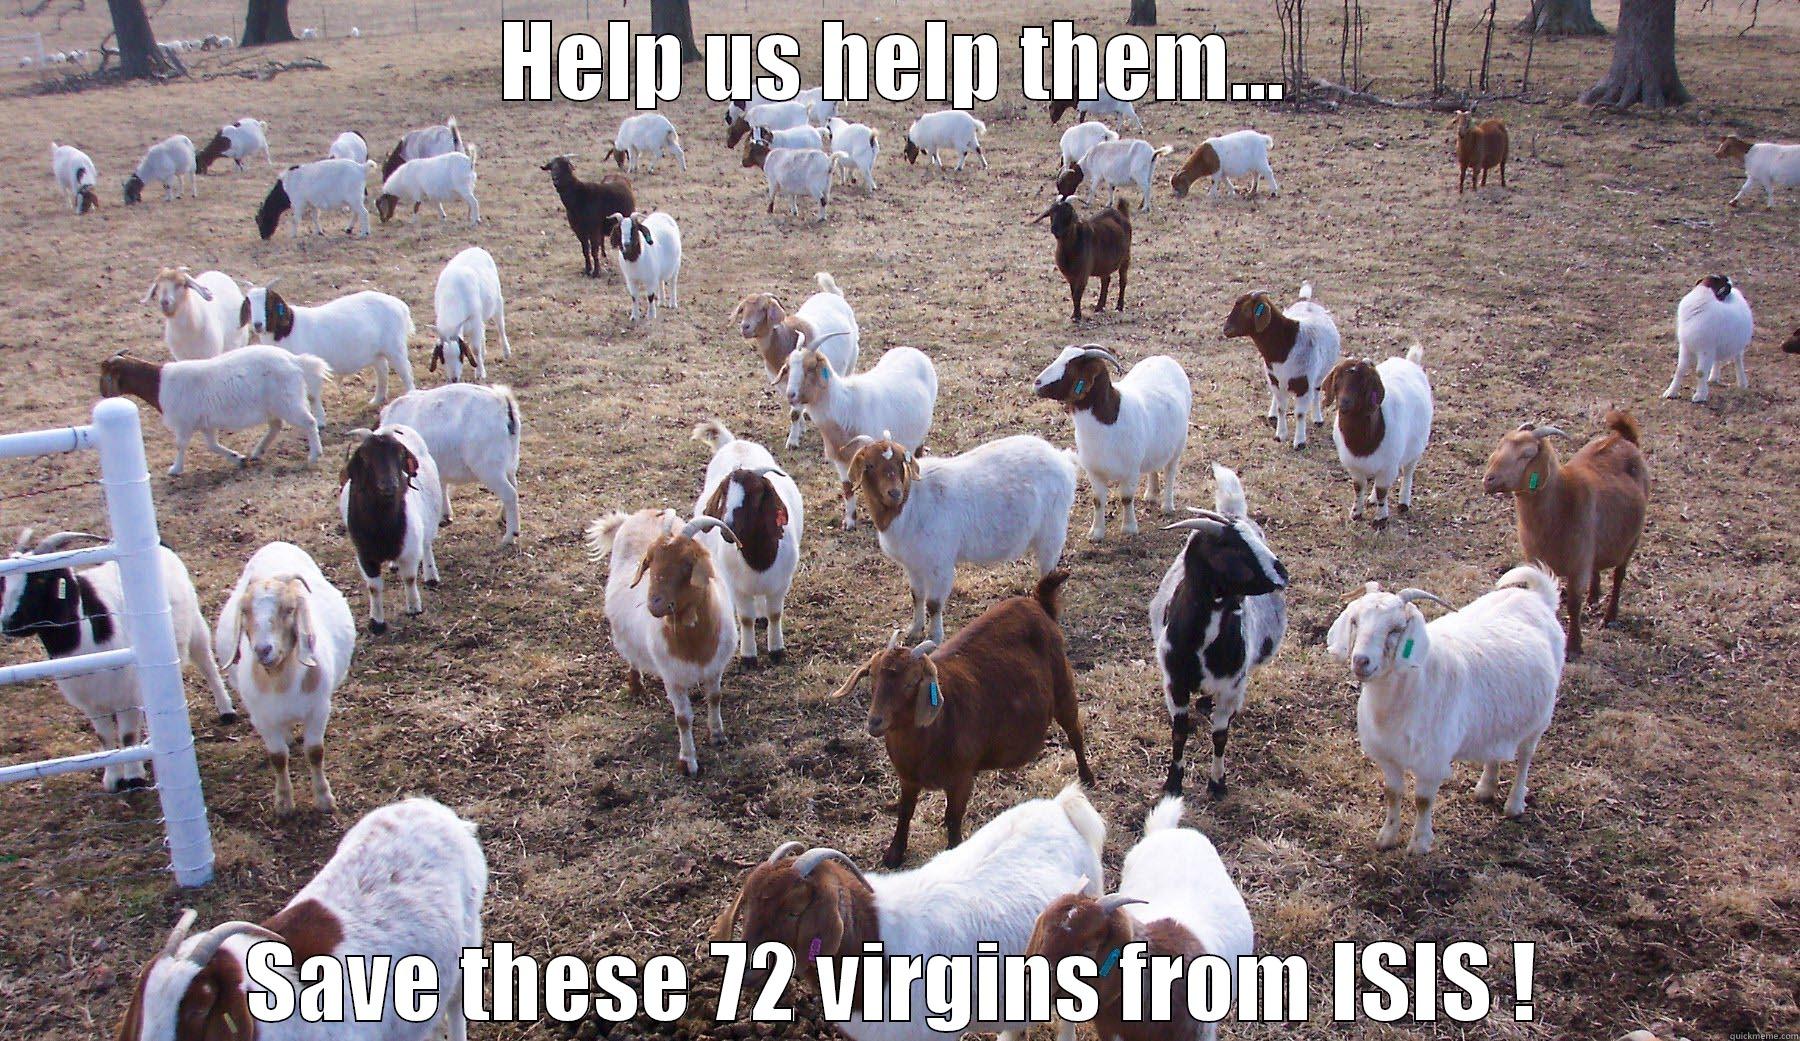 Give freely - HELP US HELP THEM... SAVE THESE 72 VIRGINS FROM ISIS ! Misc